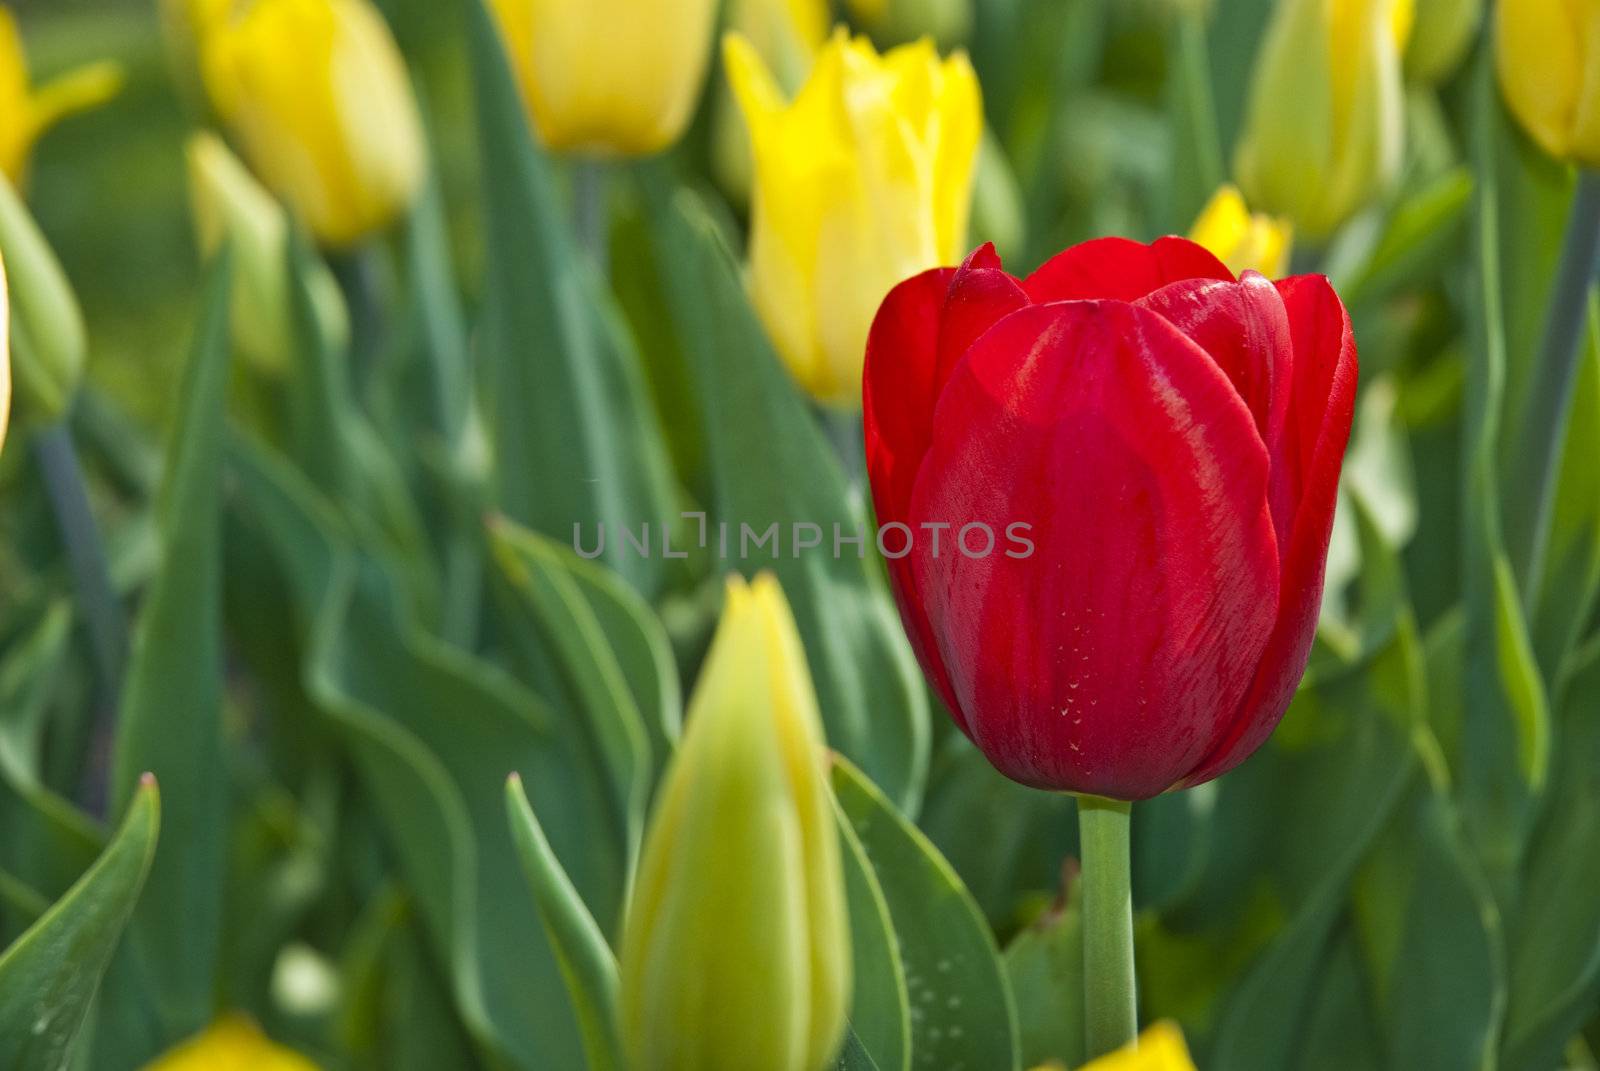 Beautiful flower red and yellow tulips in park